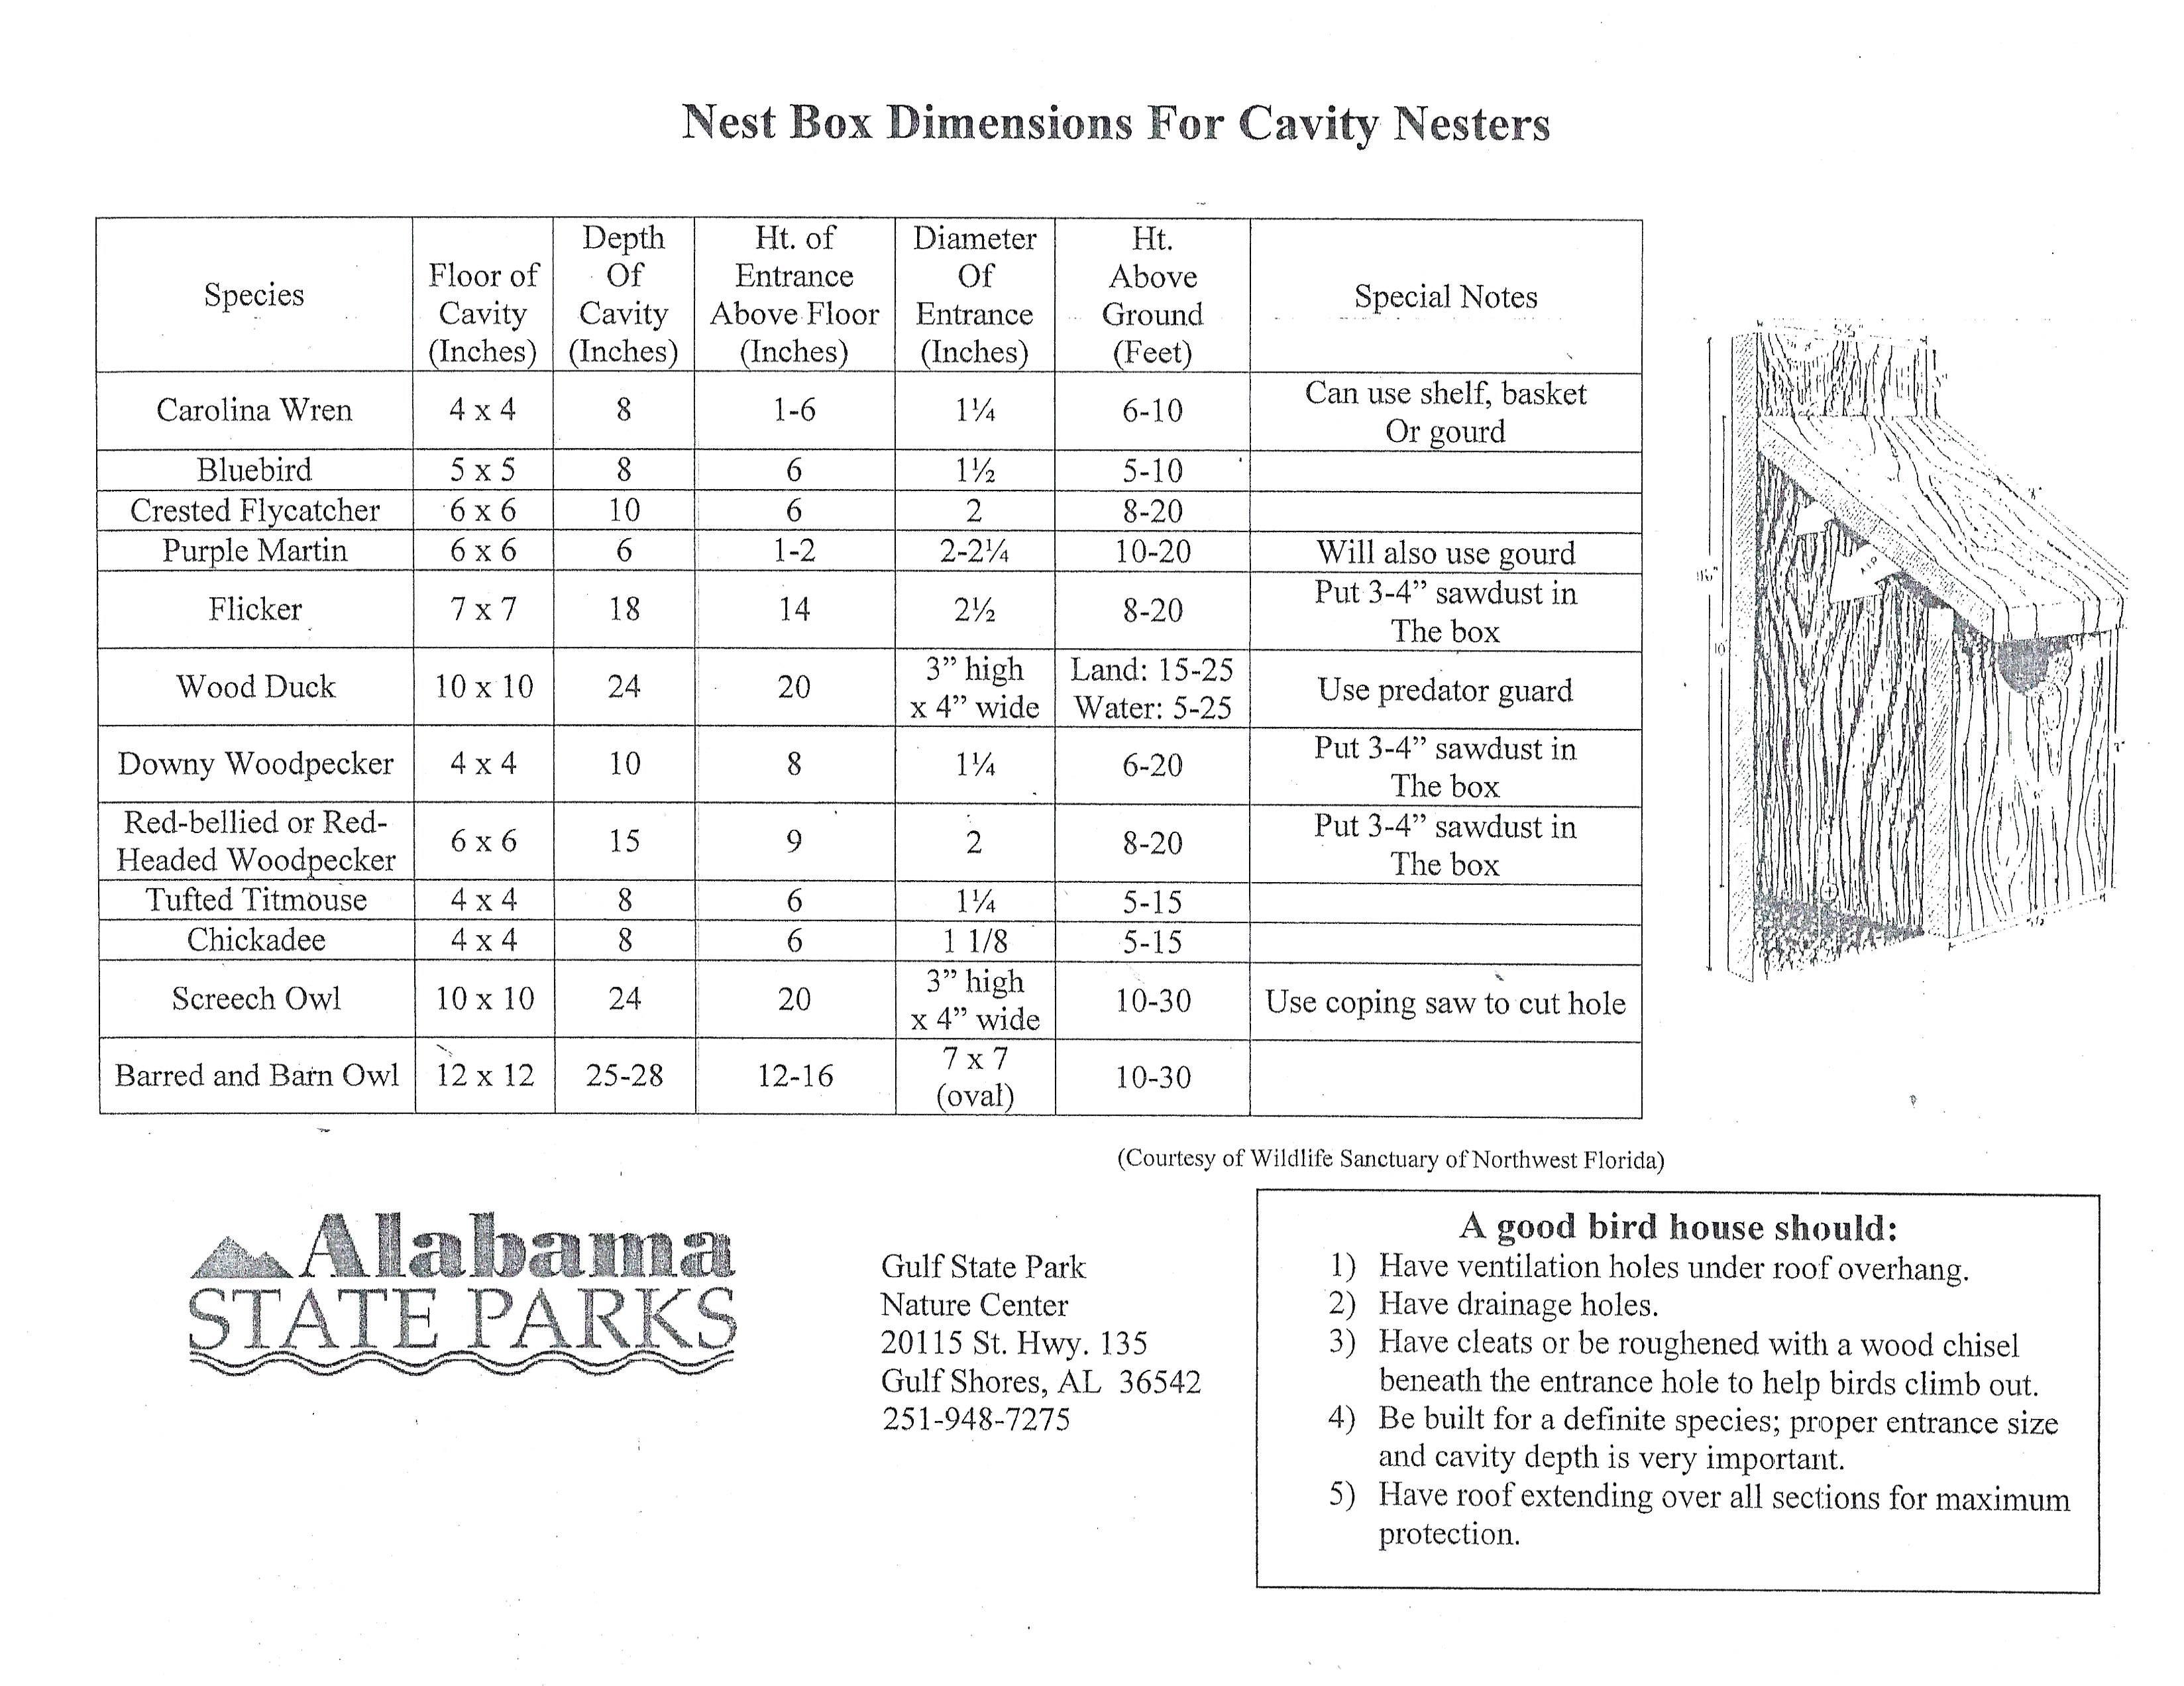 Nest Box Dimensions for Cavity Nesters at GSP